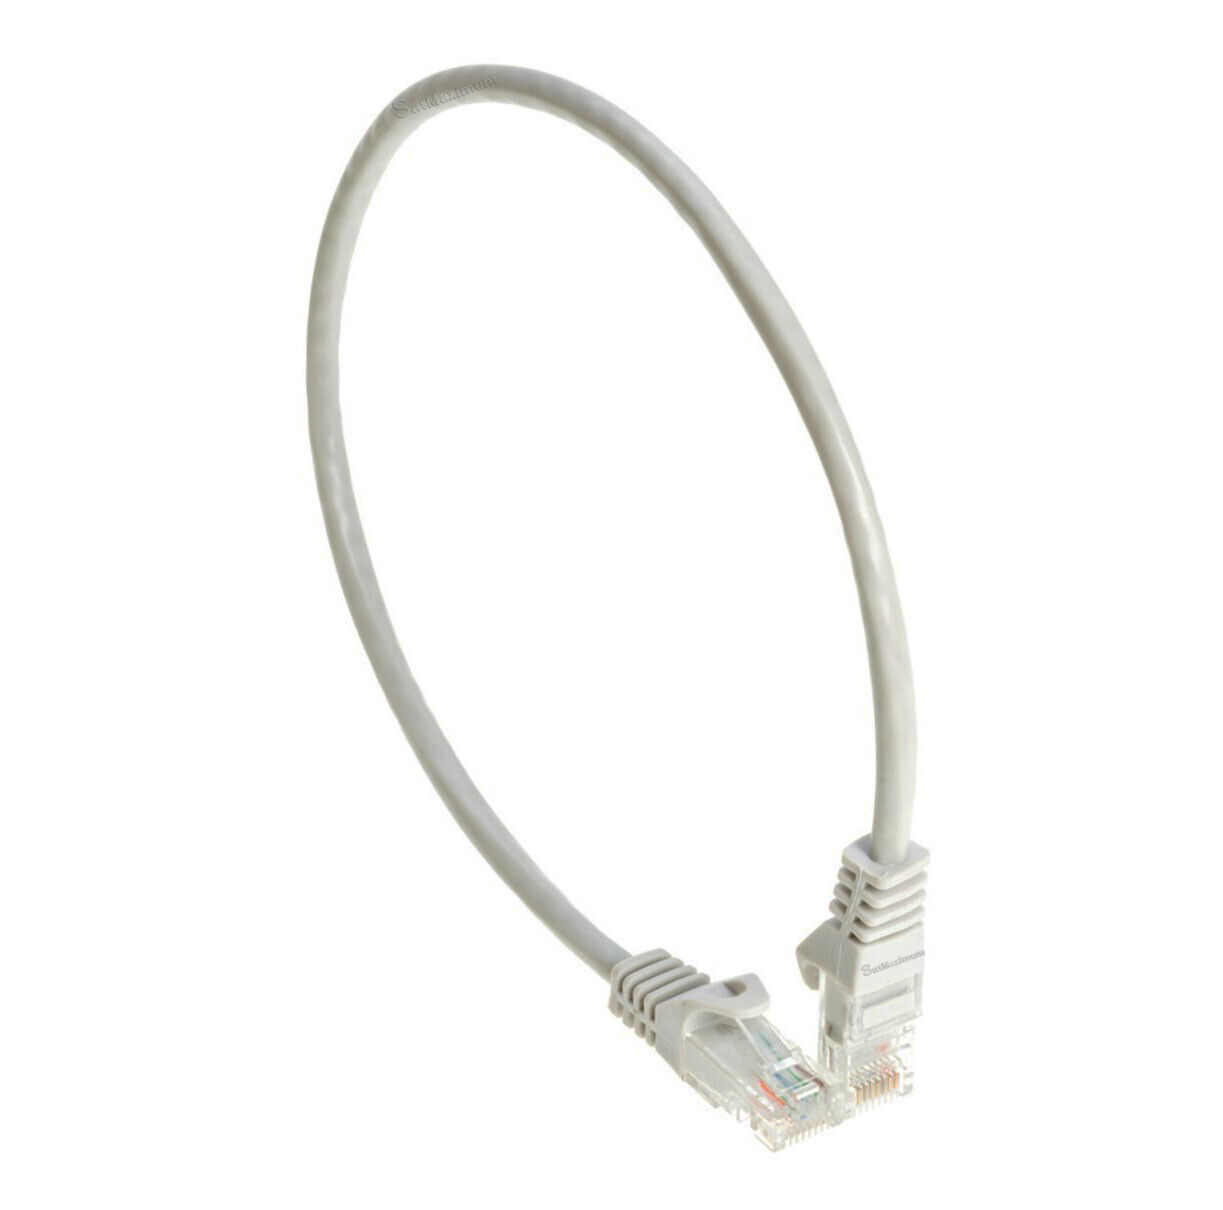 CAT6e/ CAT6 Ethernet LAN Network RJ45 Patch Cable Gray 1.5FT- 20FT Multipack LOT